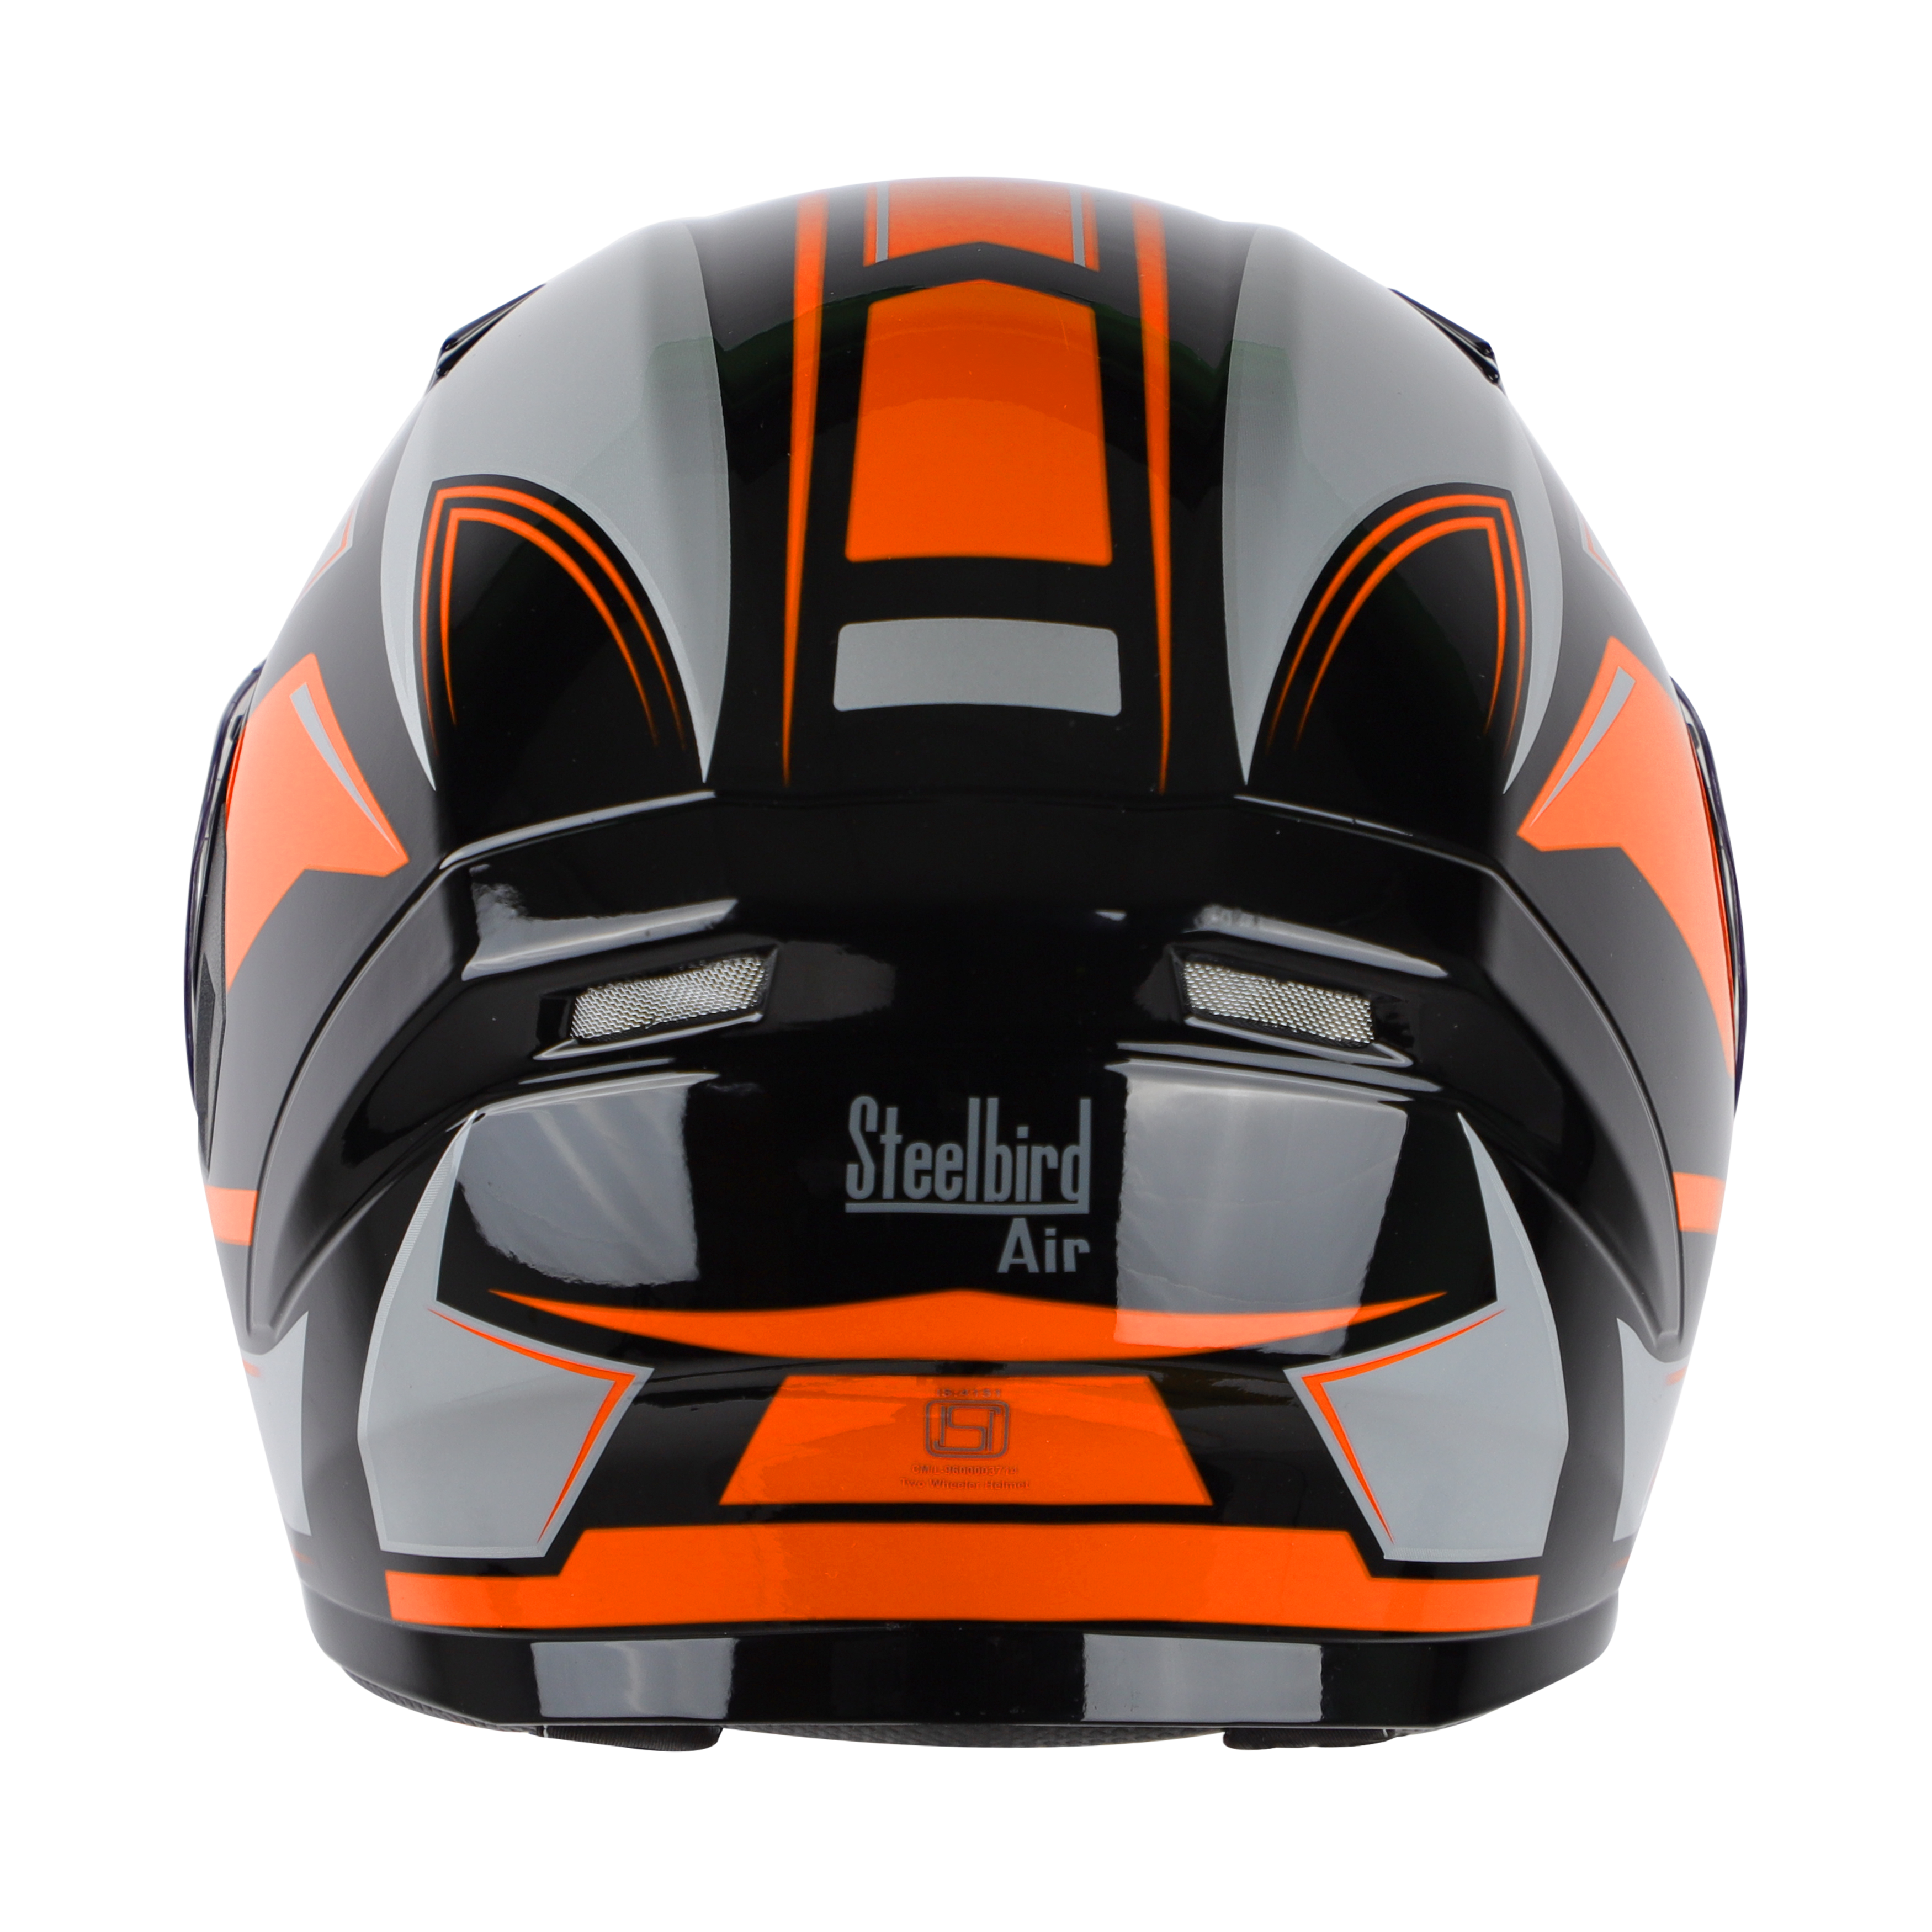 SBA-21 AIR CARBON MAT BLACK WITH ORANGE (WITH CHROME SILVER INNER SUNSHIELD)